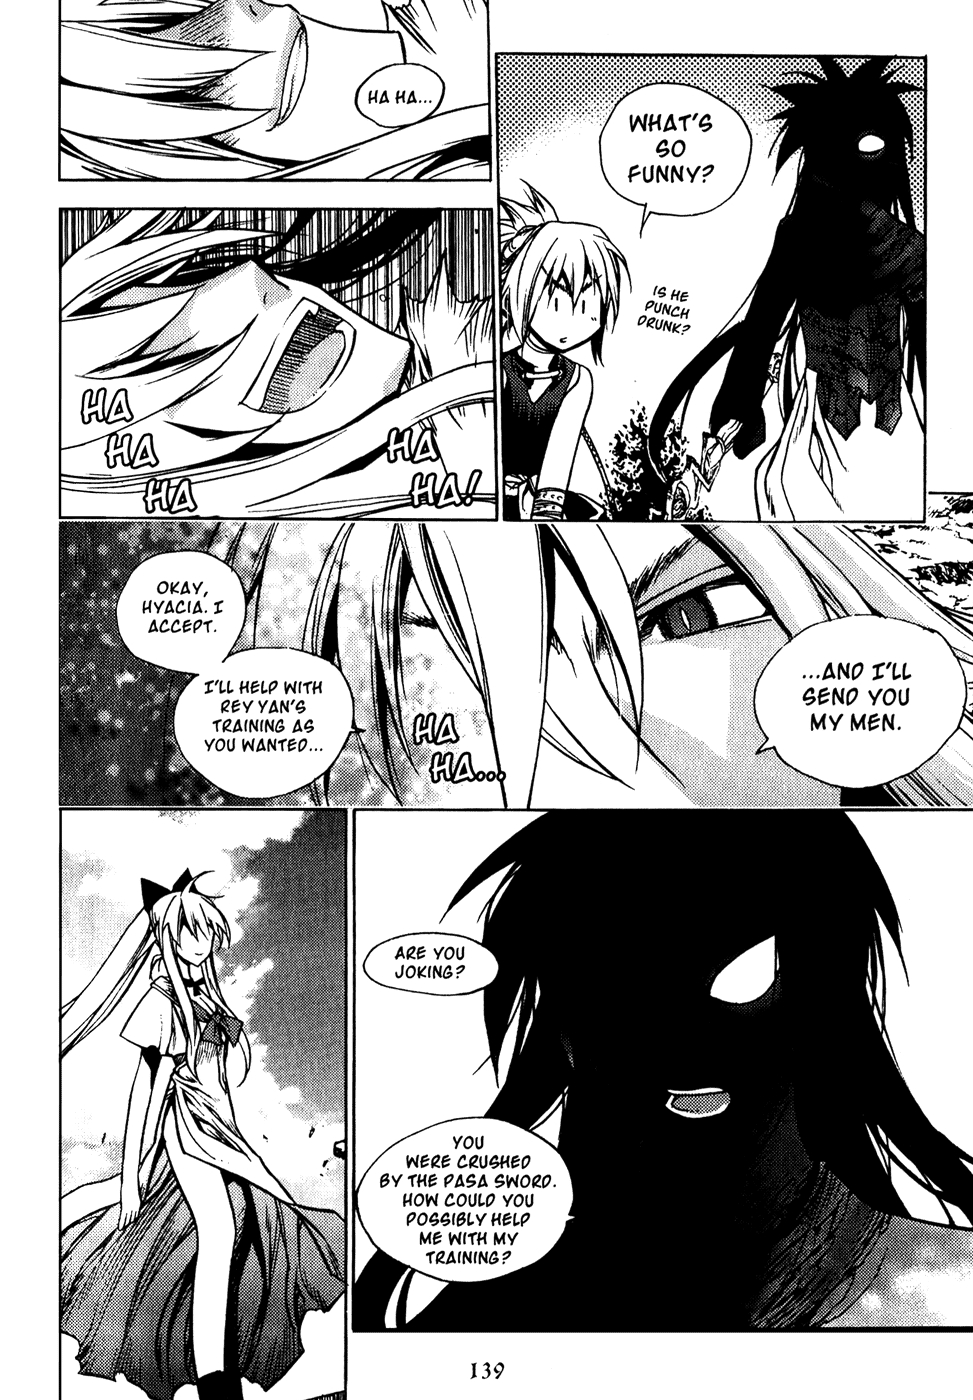 Chronicles of the Cursed Sword Vol. 19 Ch. 76 Enter Jukwol